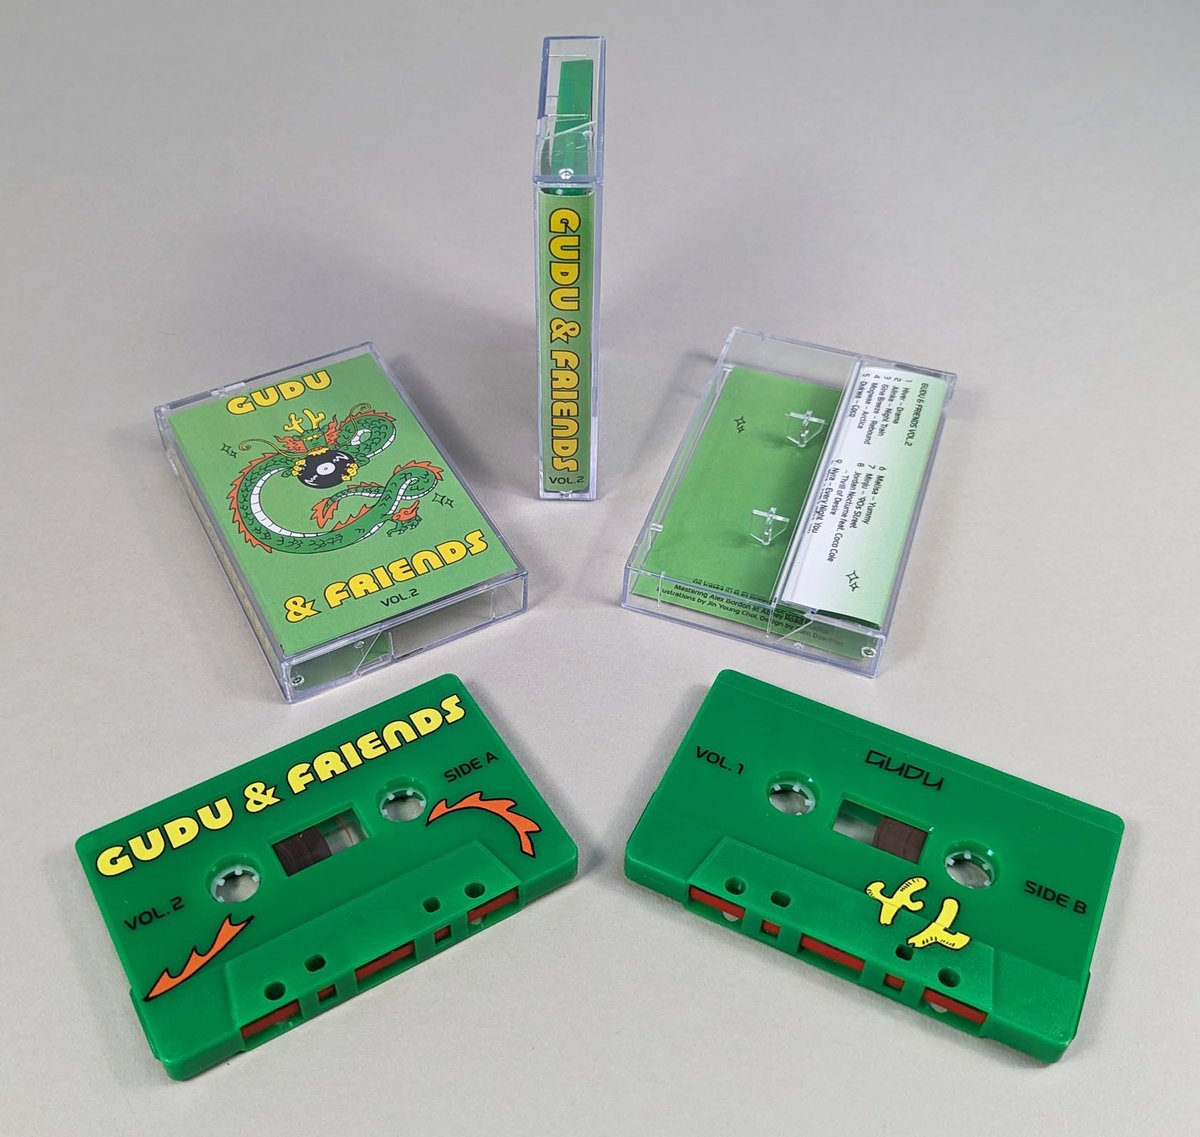 Soo hyped to be a part of Gudu & Friends Vol. 2. Pre orders available now with a limited edition cassette tape 🐉 Link in bio 🐲💚